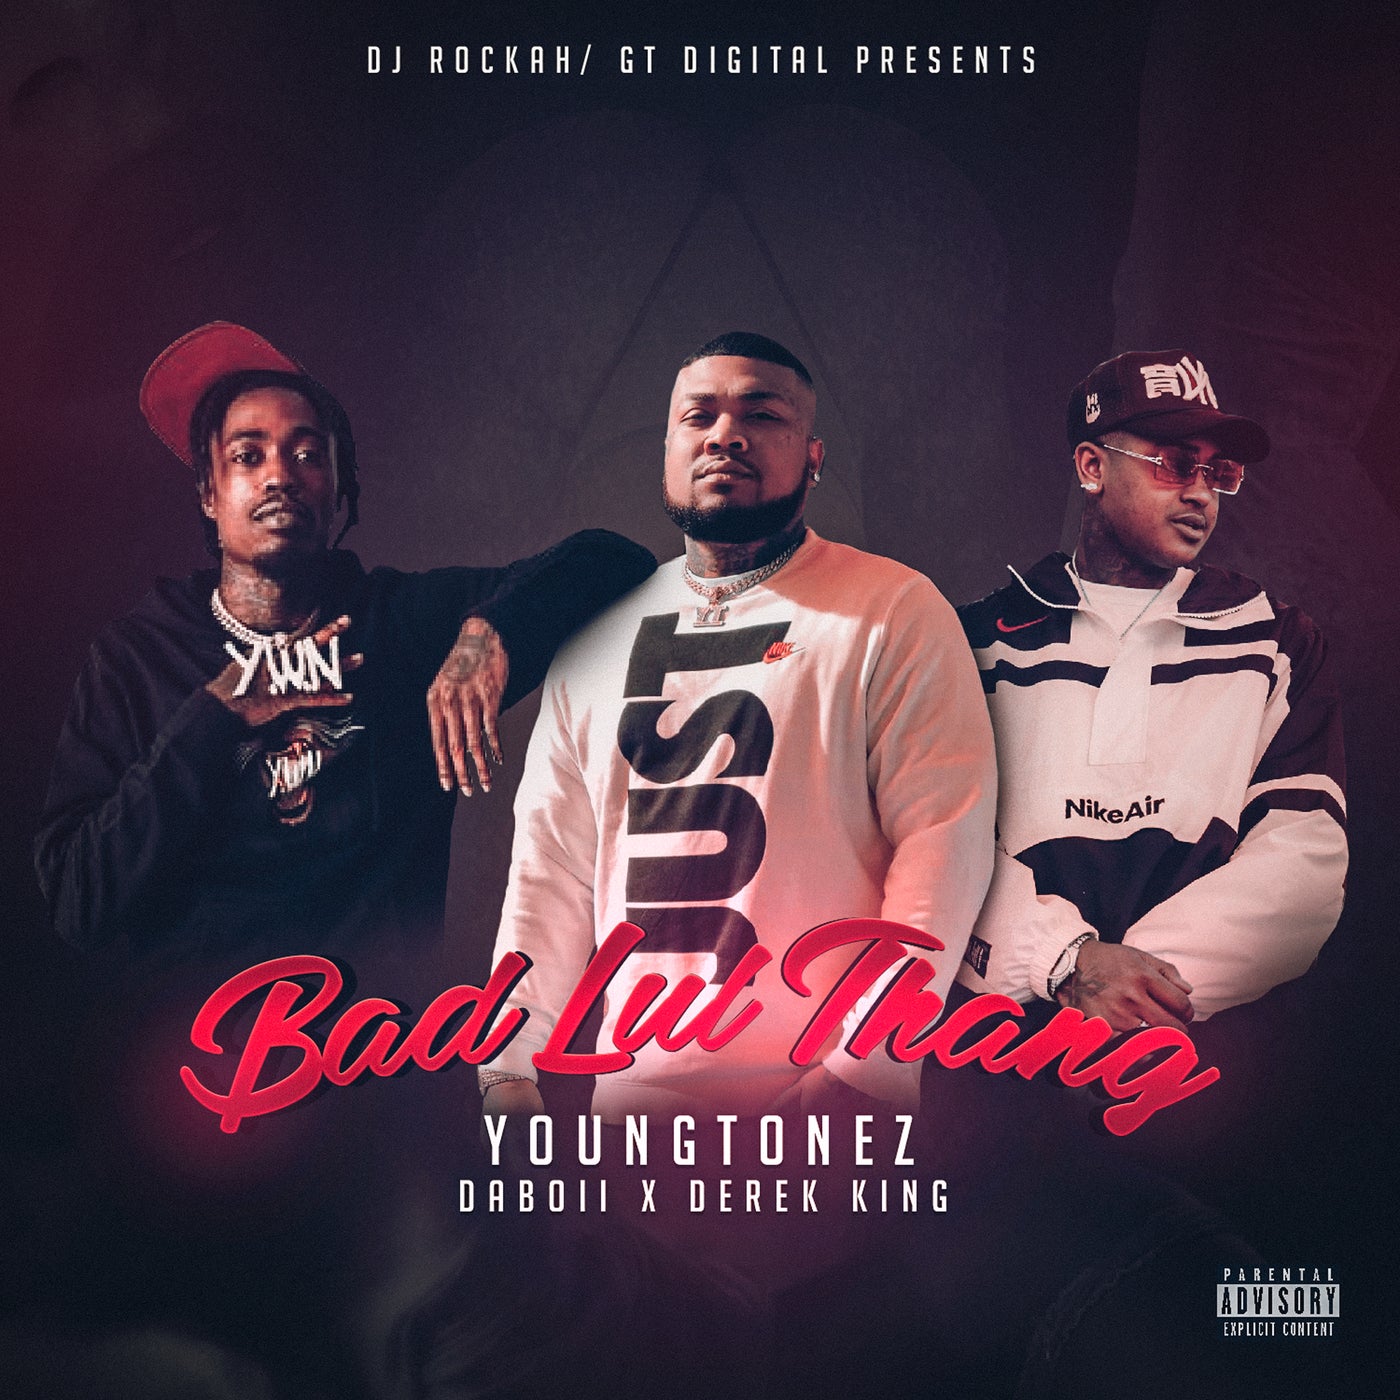 Bad Lul Thang by DaBoii, Derek King and Young Tonez on Beatsource